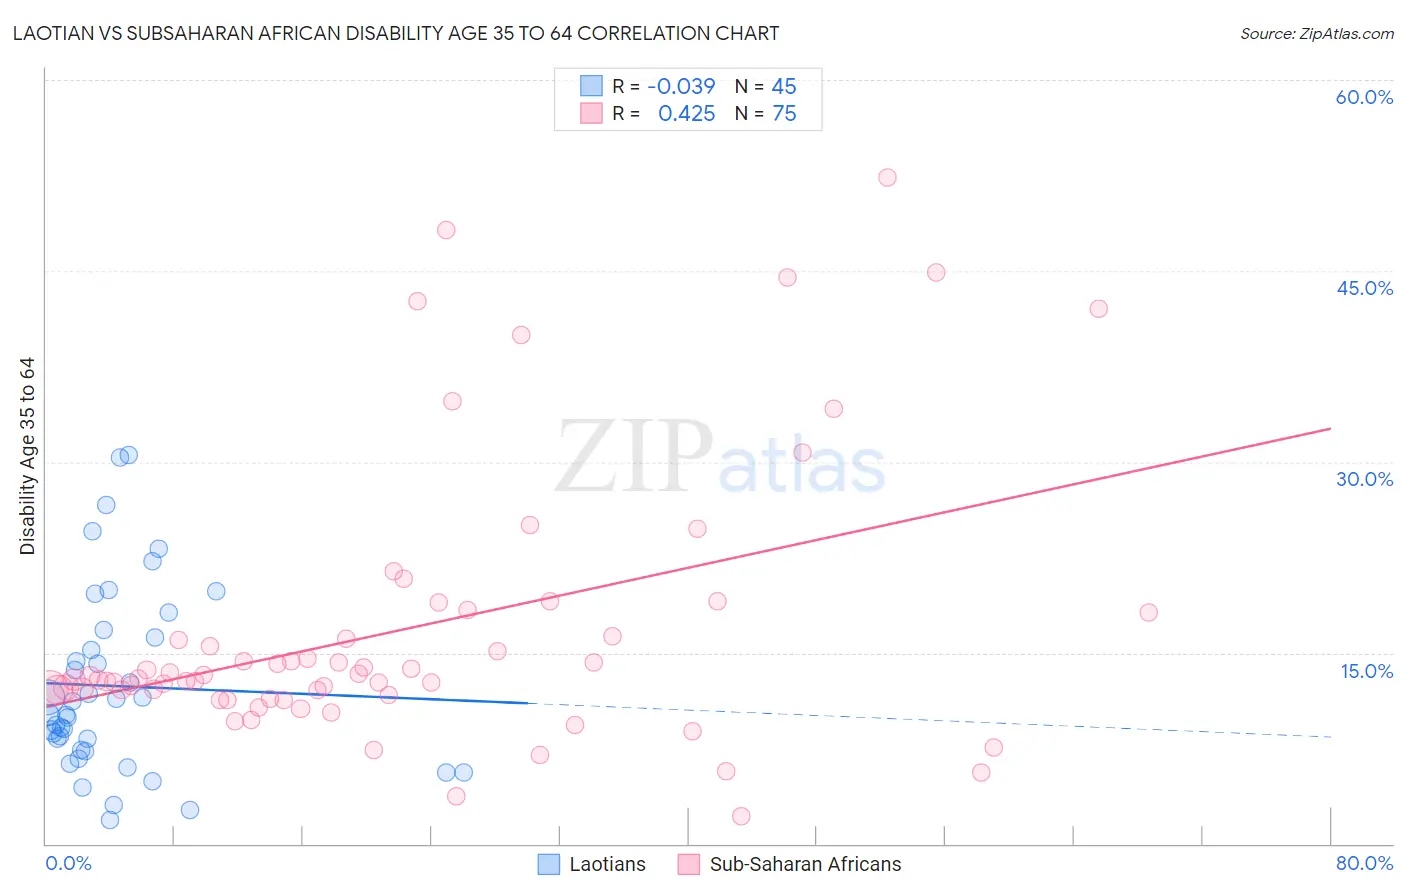 Laotian vs Subsaharan African Disability Age 35 to 64